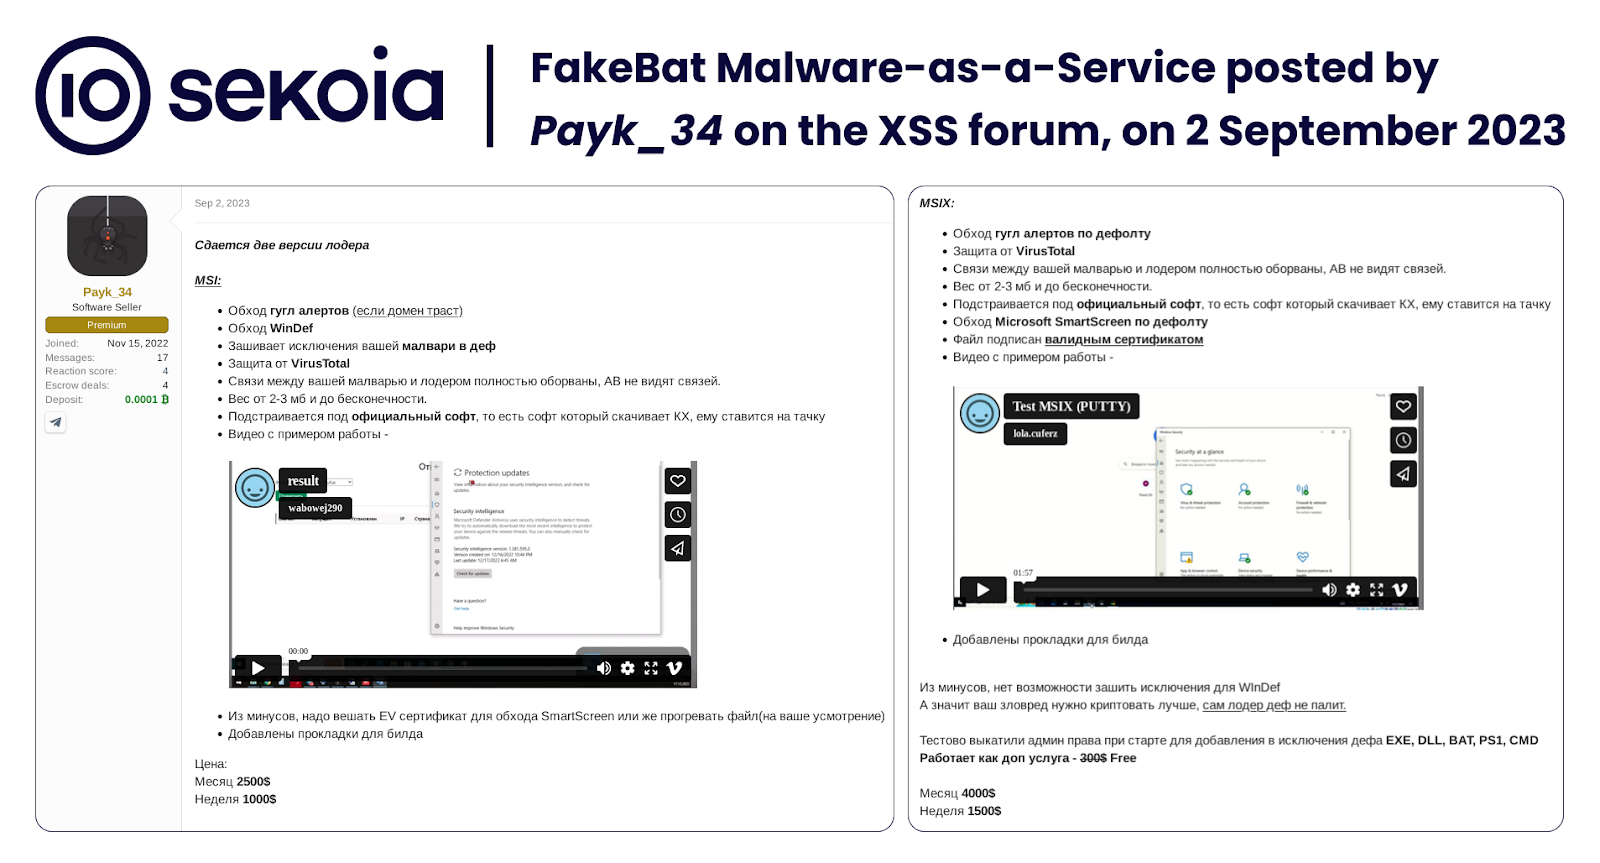 FakeBat (aka Payk Loader) advertisement on the XSS forum, published by Payk_34 on 2 September 2023